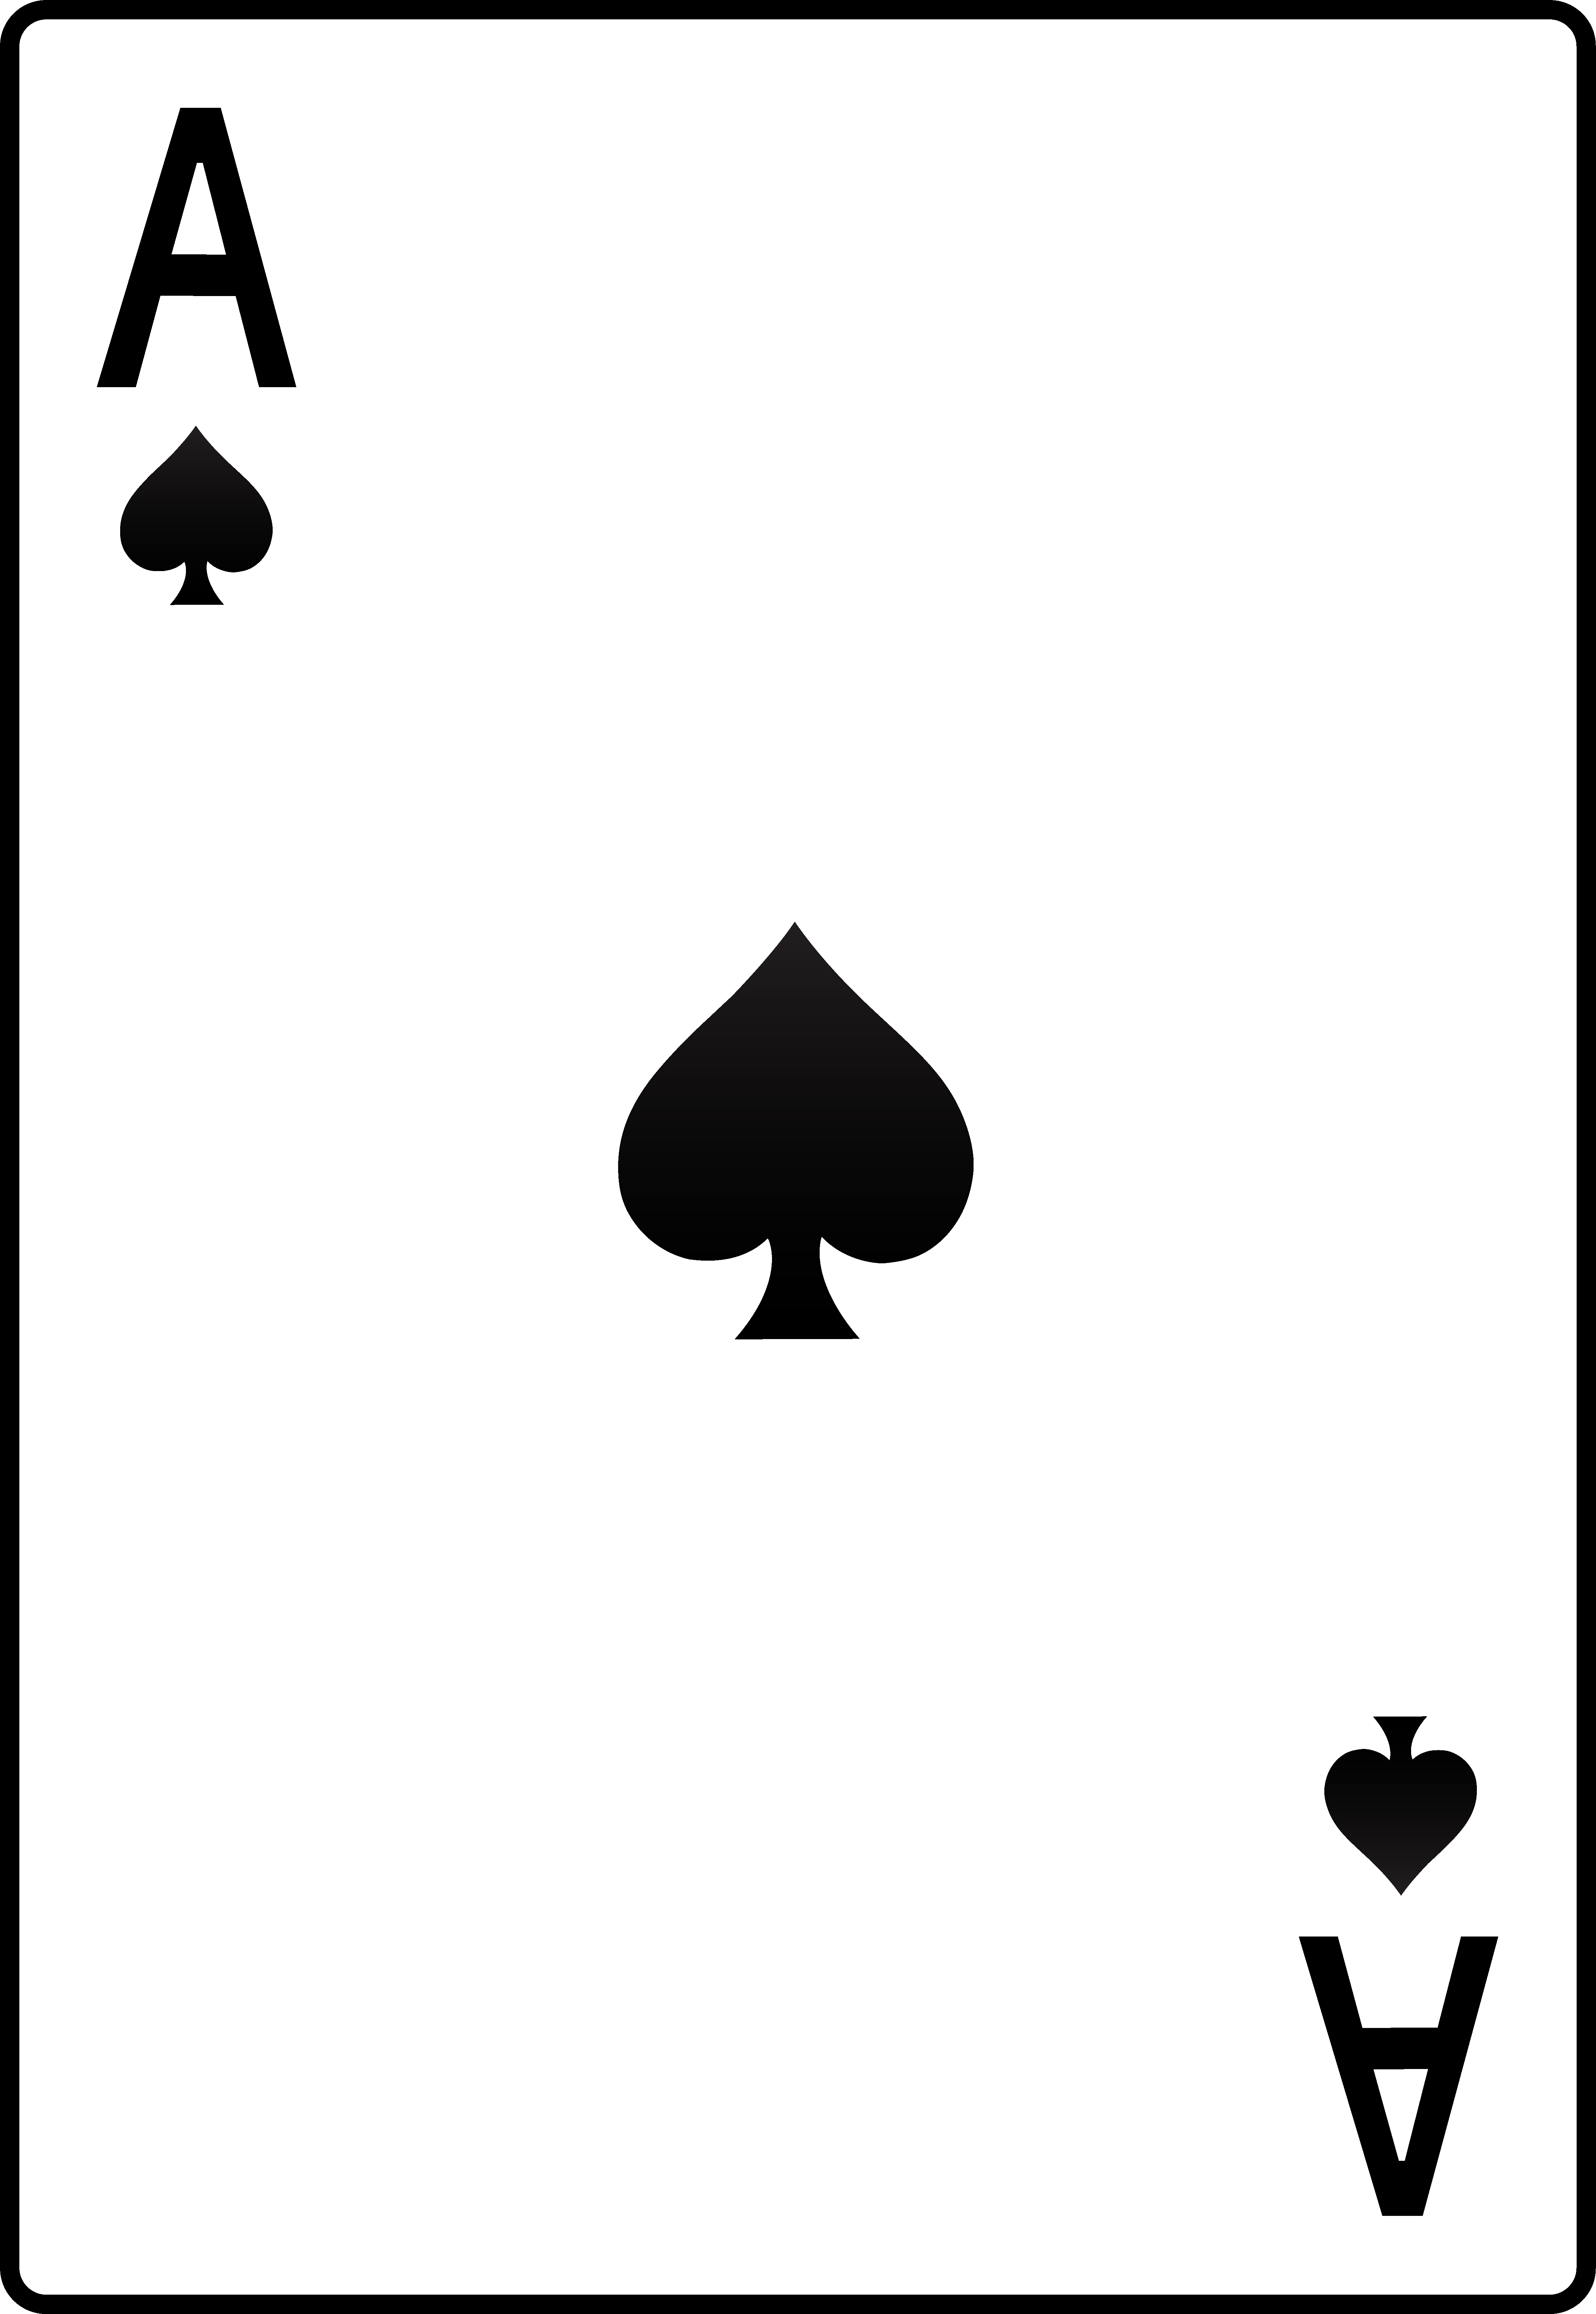 High Resolution Wallpaper | Ace Of Spades 4782x6933 px